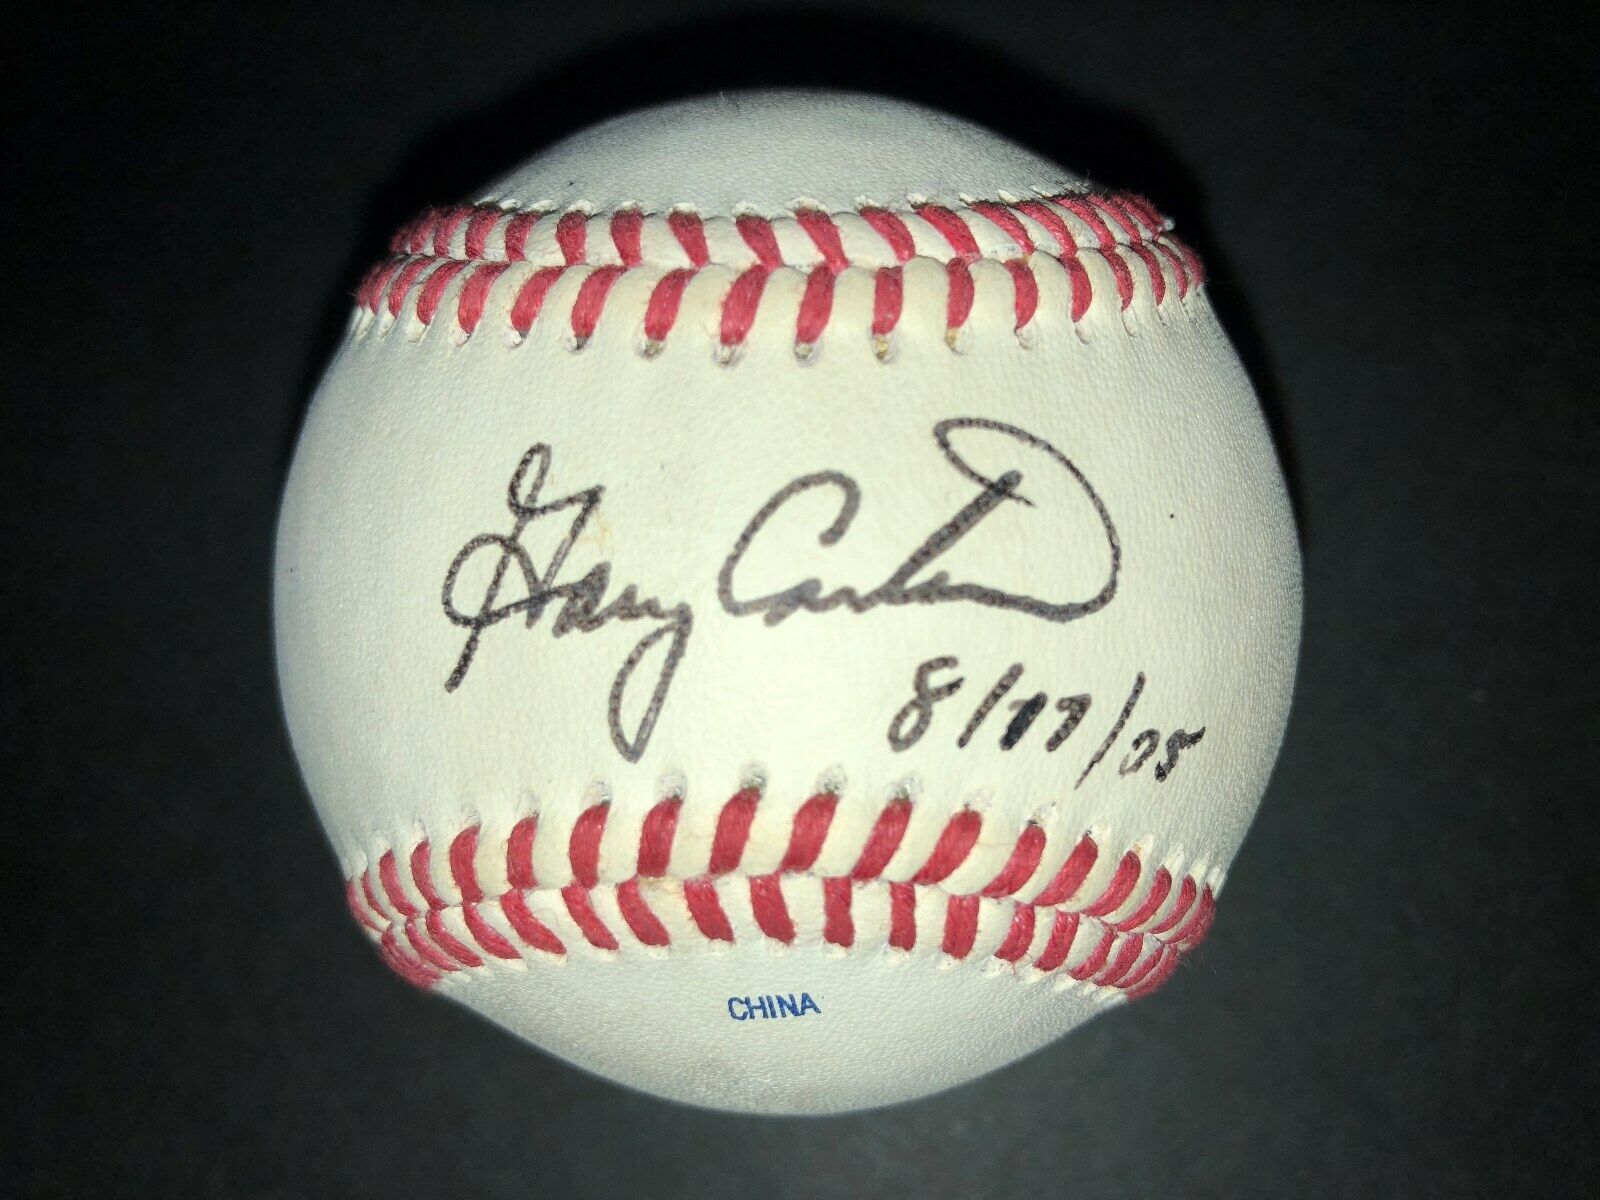 EXPOS HOF: Gary Carter, SIGNED GCL Ball from 2005